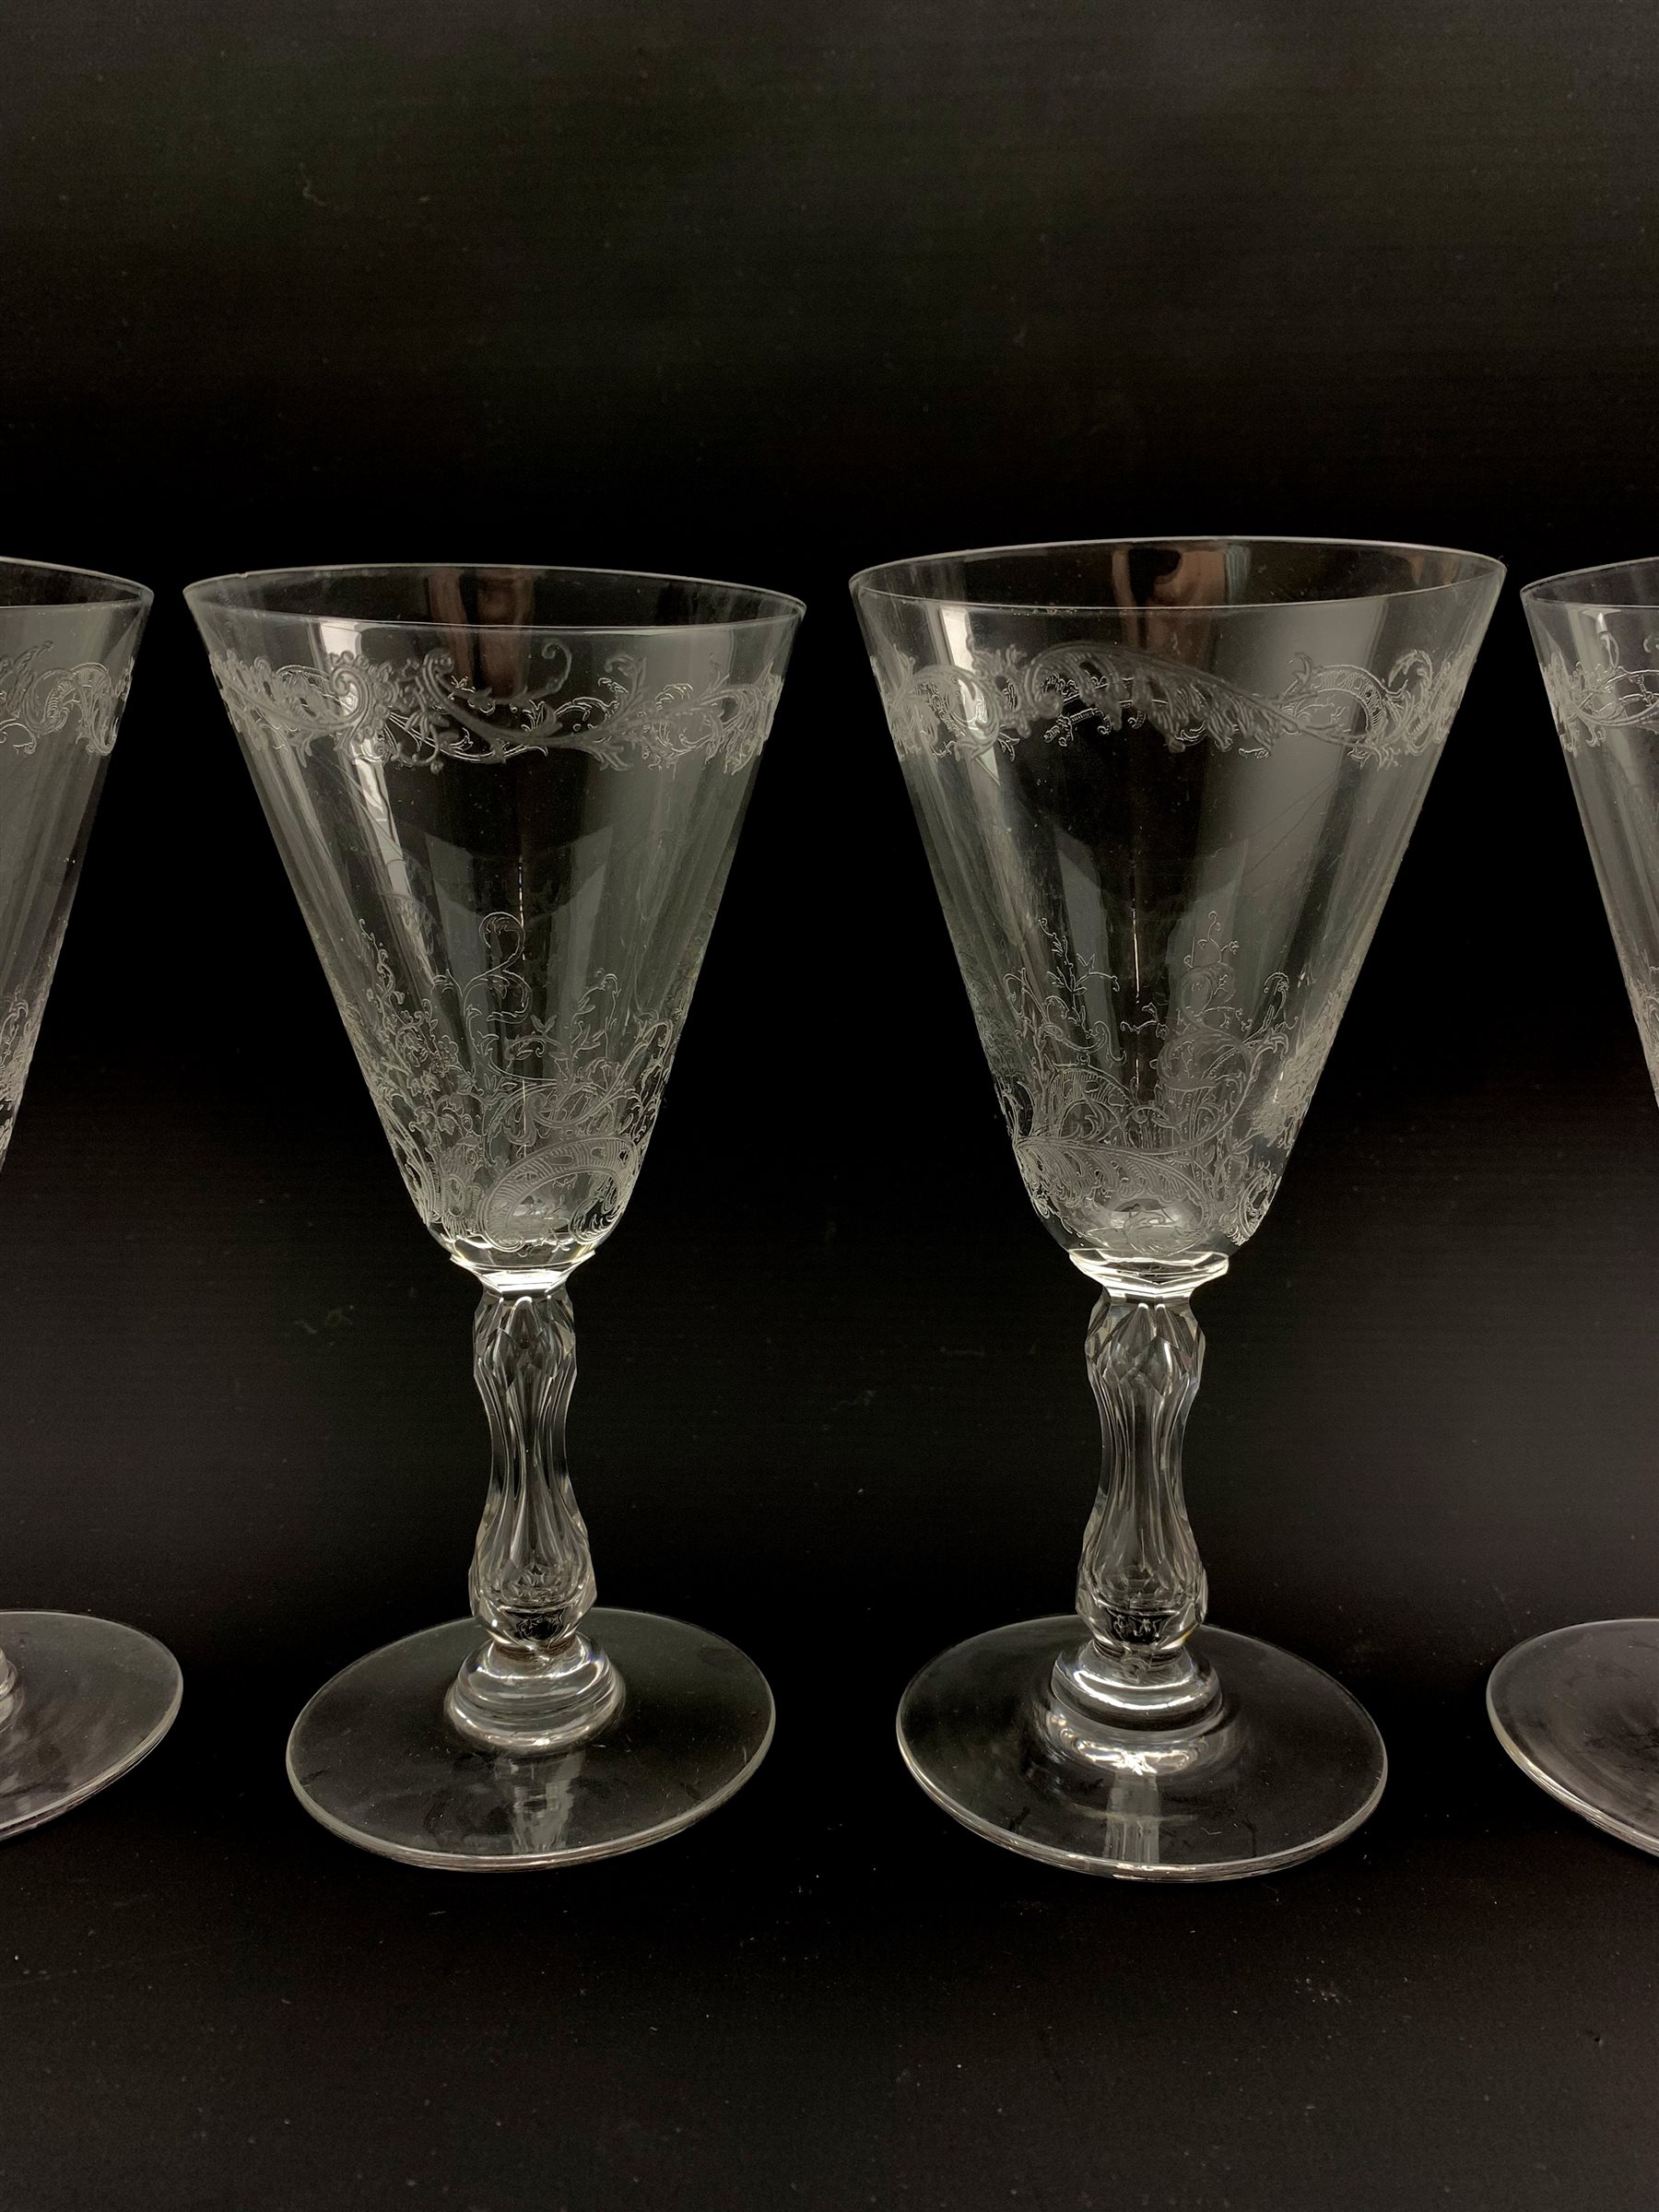 Set of seven early 20th century claret glasses decorated in the Baccarat style with foliate engraved - Image 2 of 2